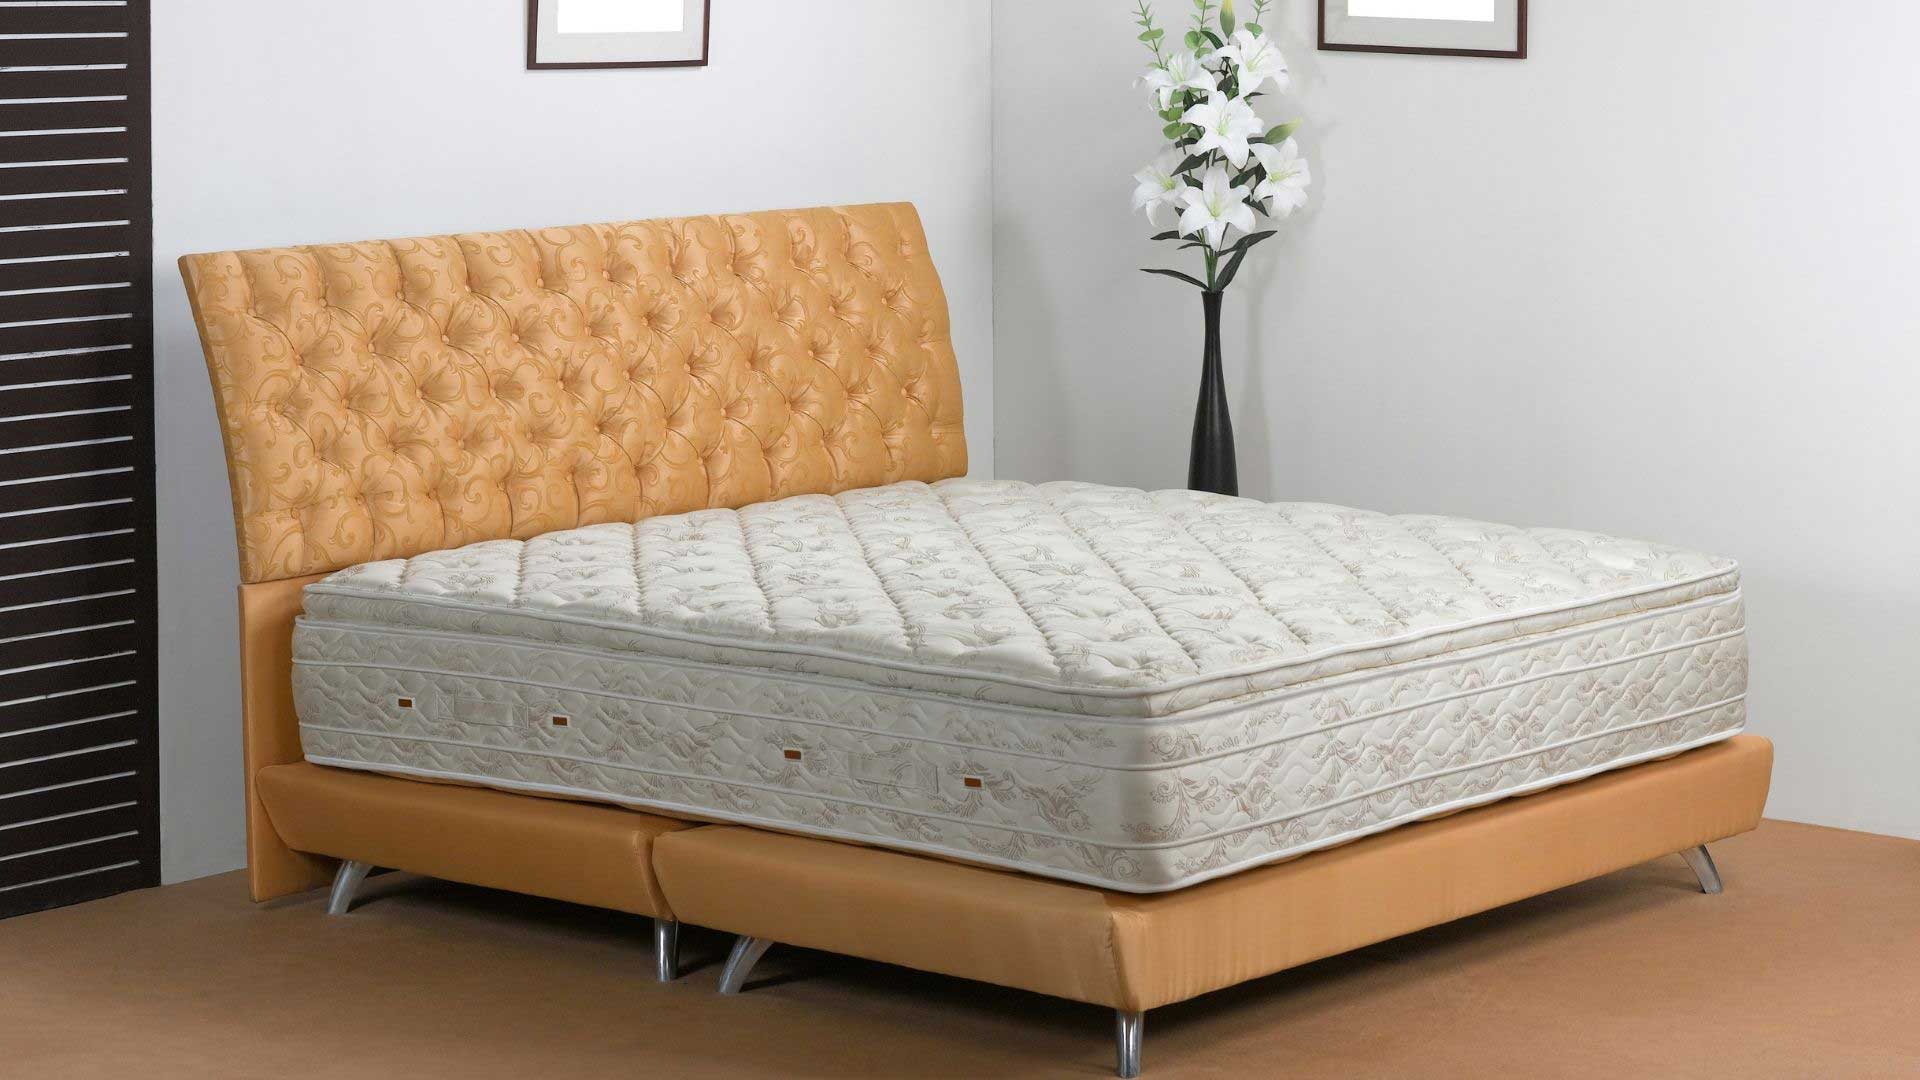 Who Invented the Mattress?